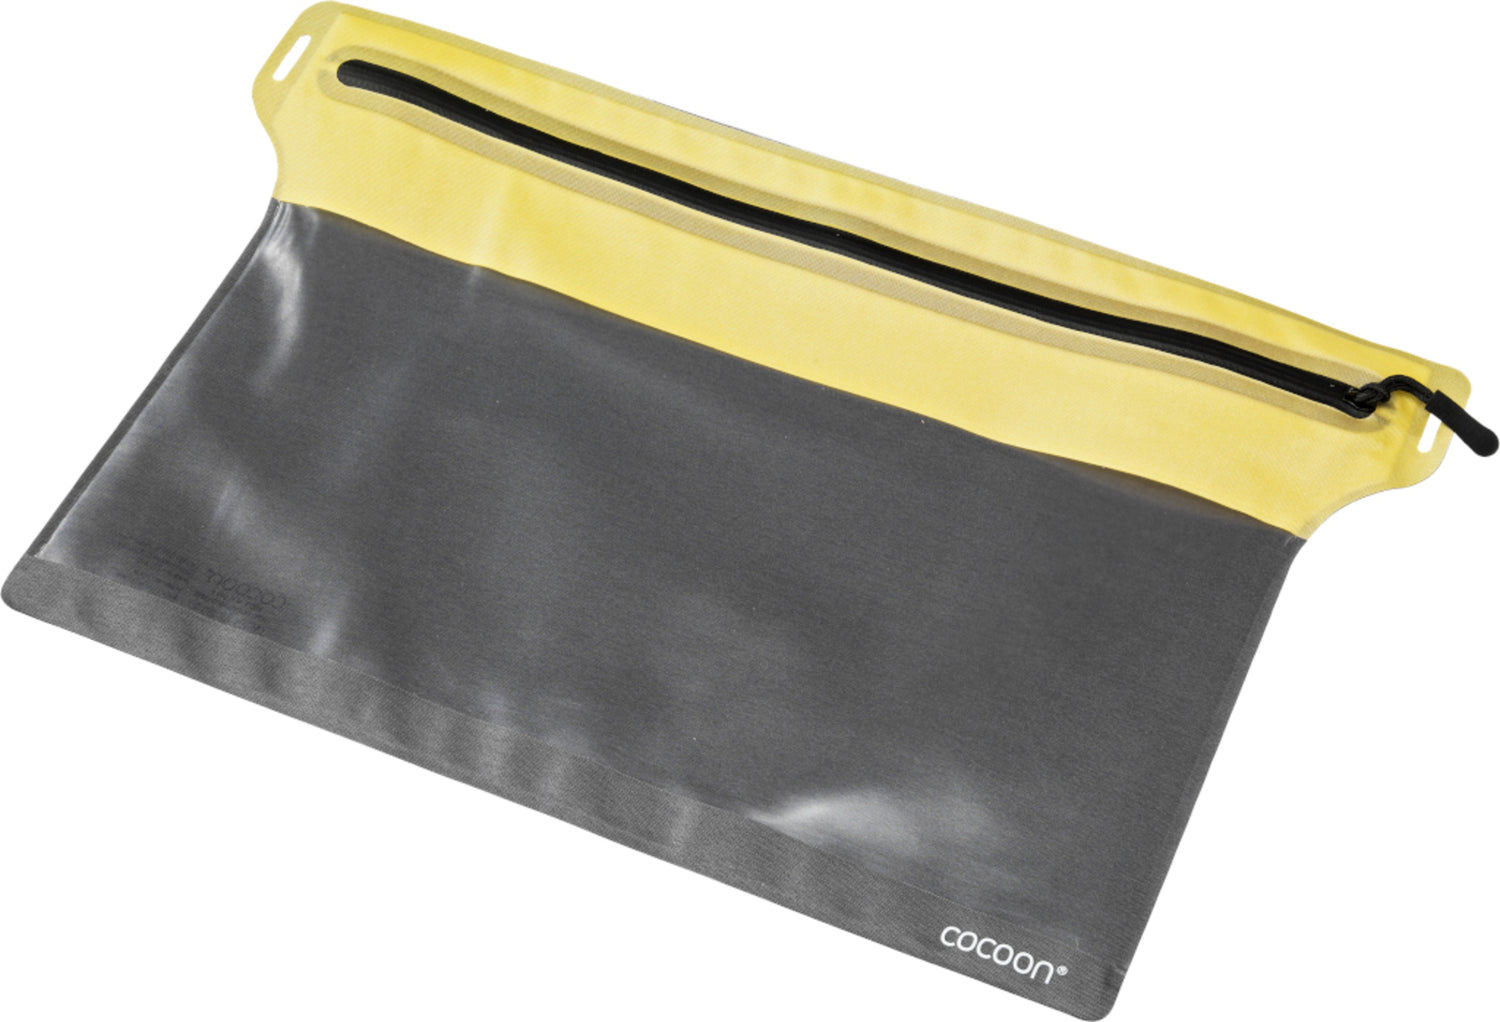 Cocoon Zippered Flat Document Bags Size L grey/yellow